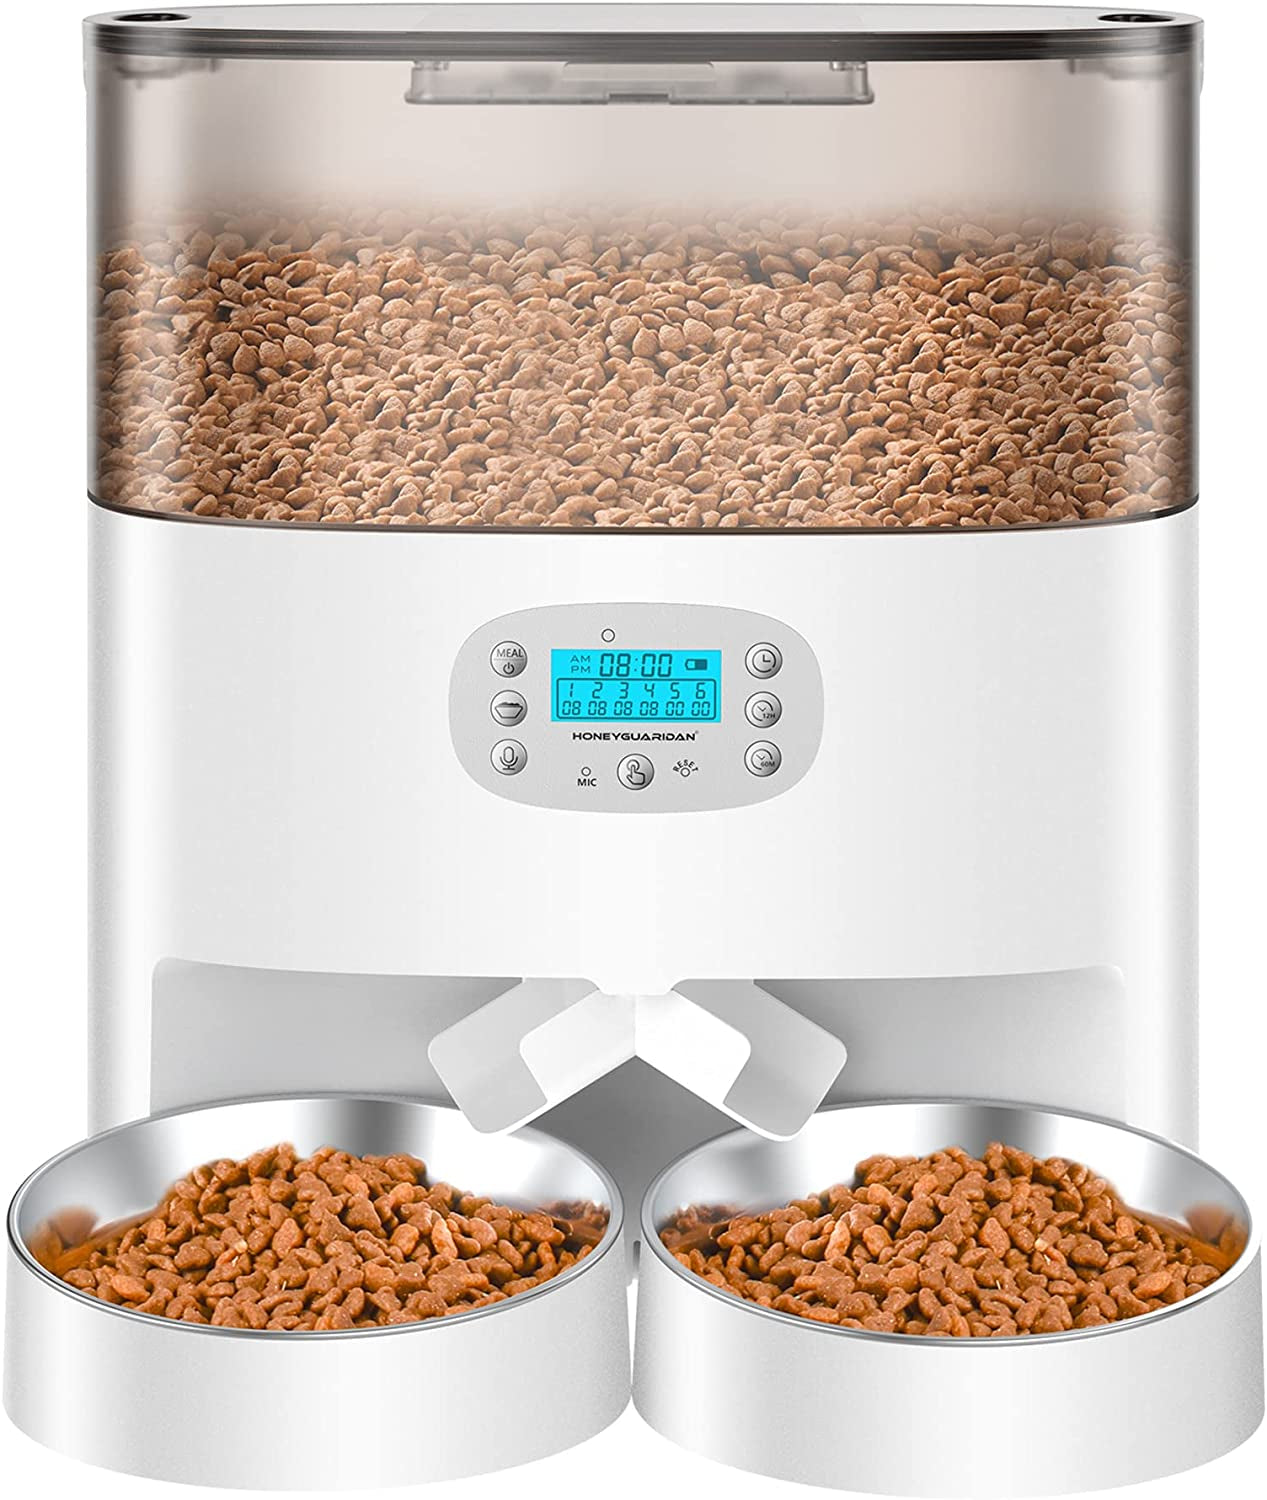 Automatic Pet Feeder with Dual Power Supply and Portion Control for Cats and Dogs